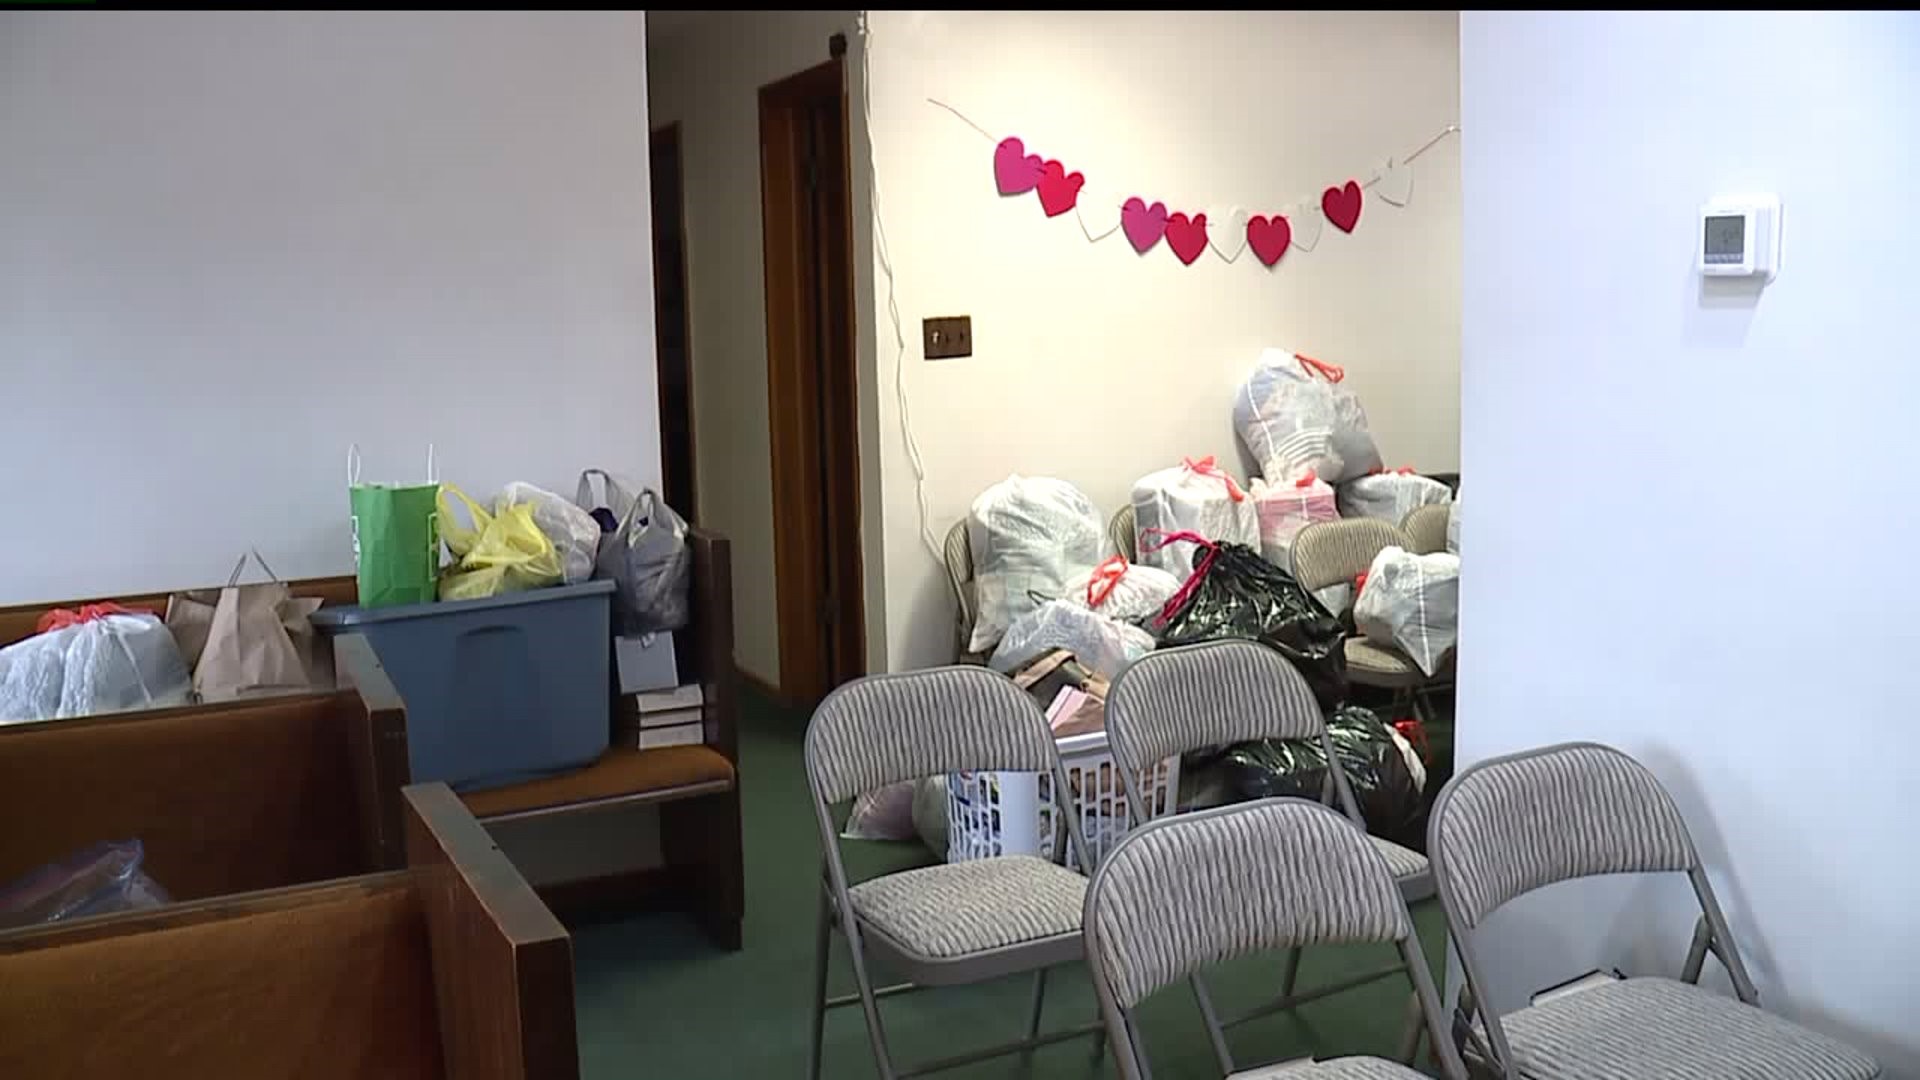 After family loses everything in a house fire, community comes together to help